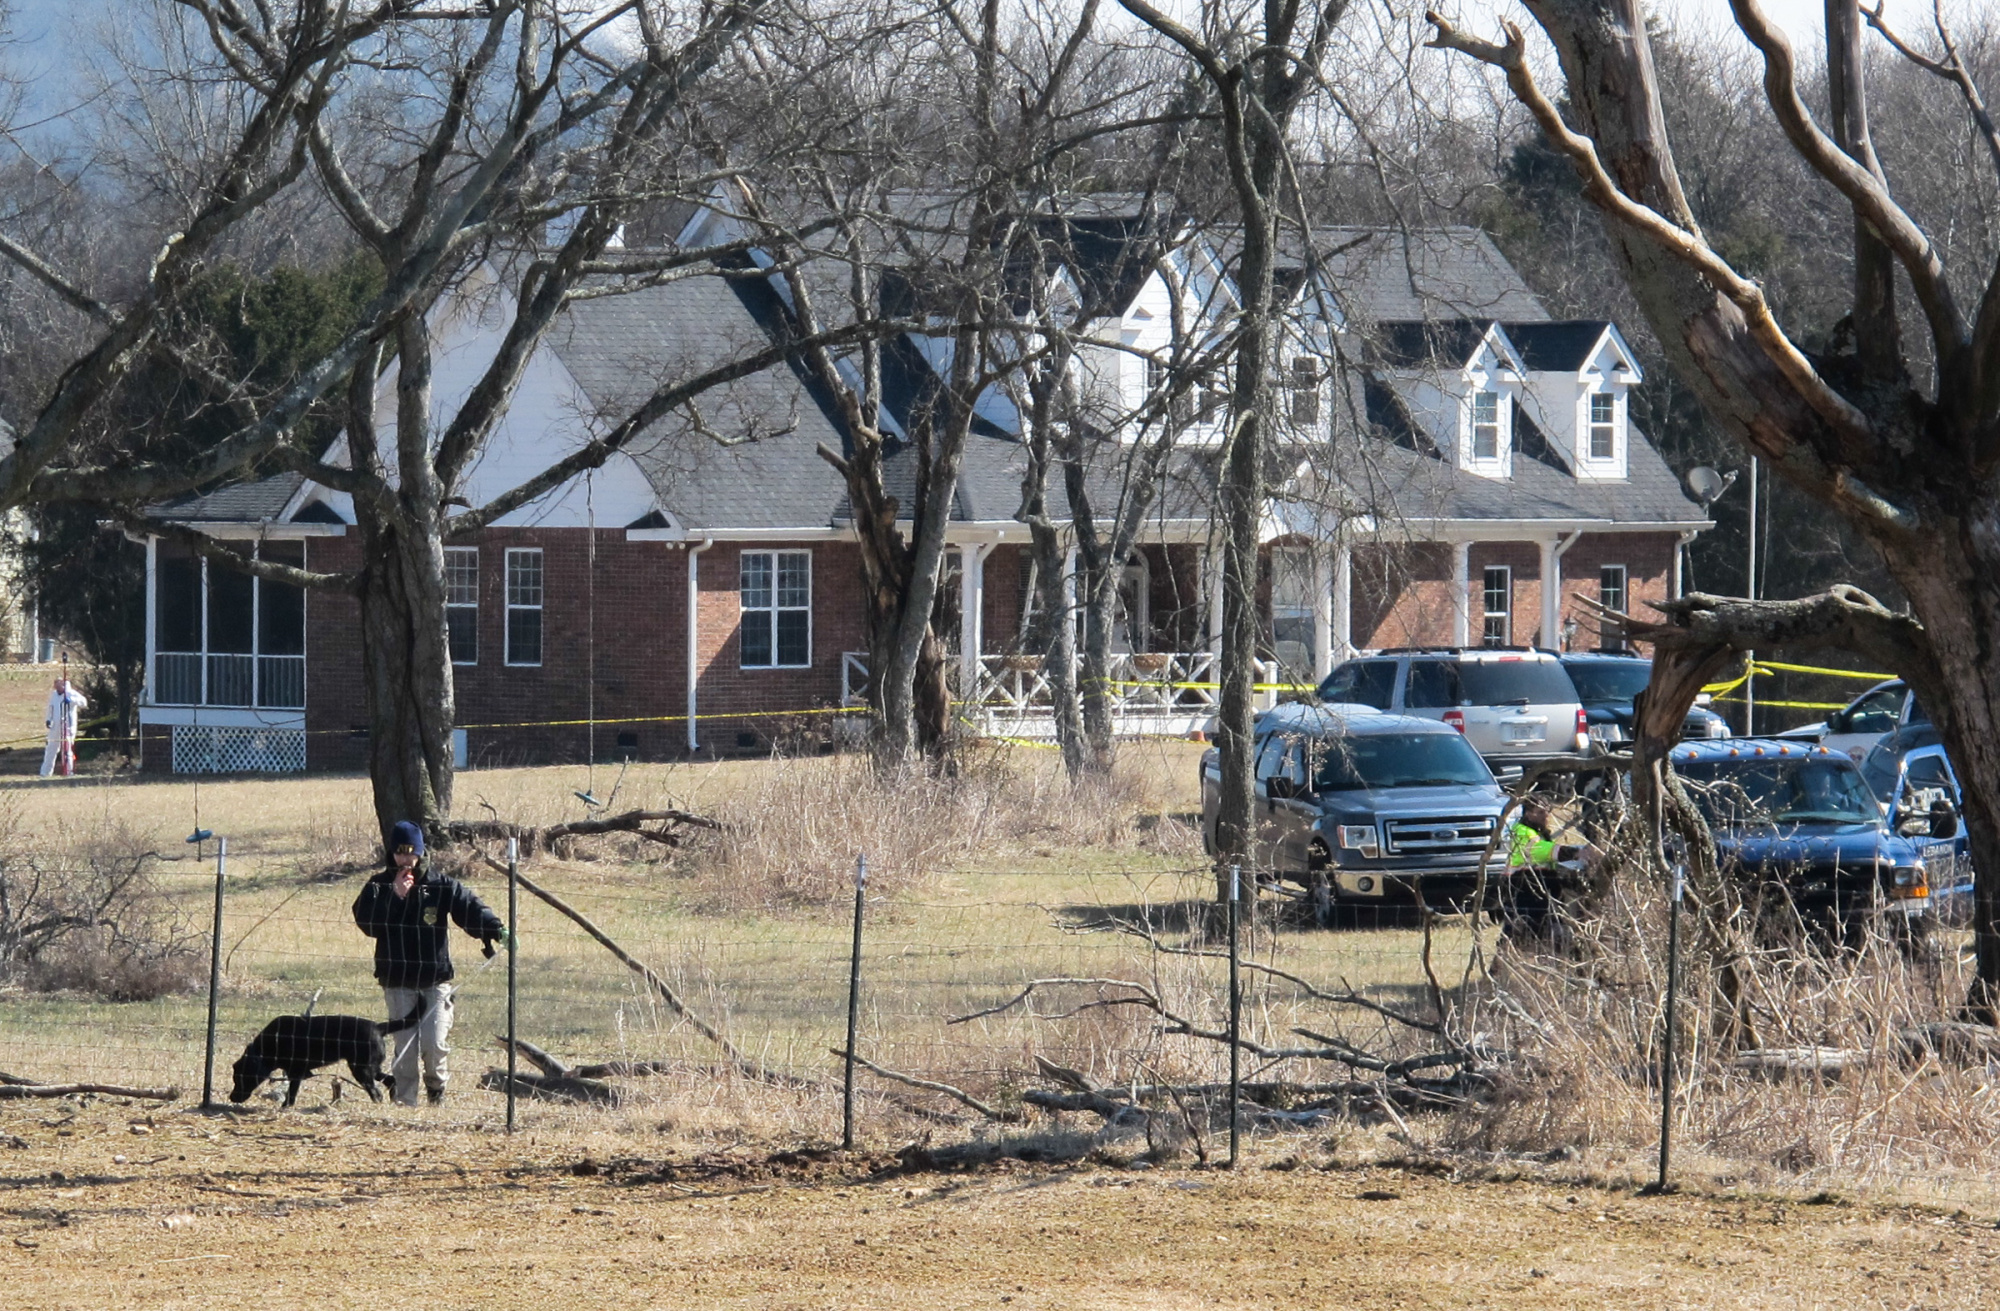 An officer and a dog inspect a fence near a home in Lebanon, Tenn., on Tuesday, Feb. 11, 2014, where police said a package exploded, killing a 74-year-old man and his wife. (AP)